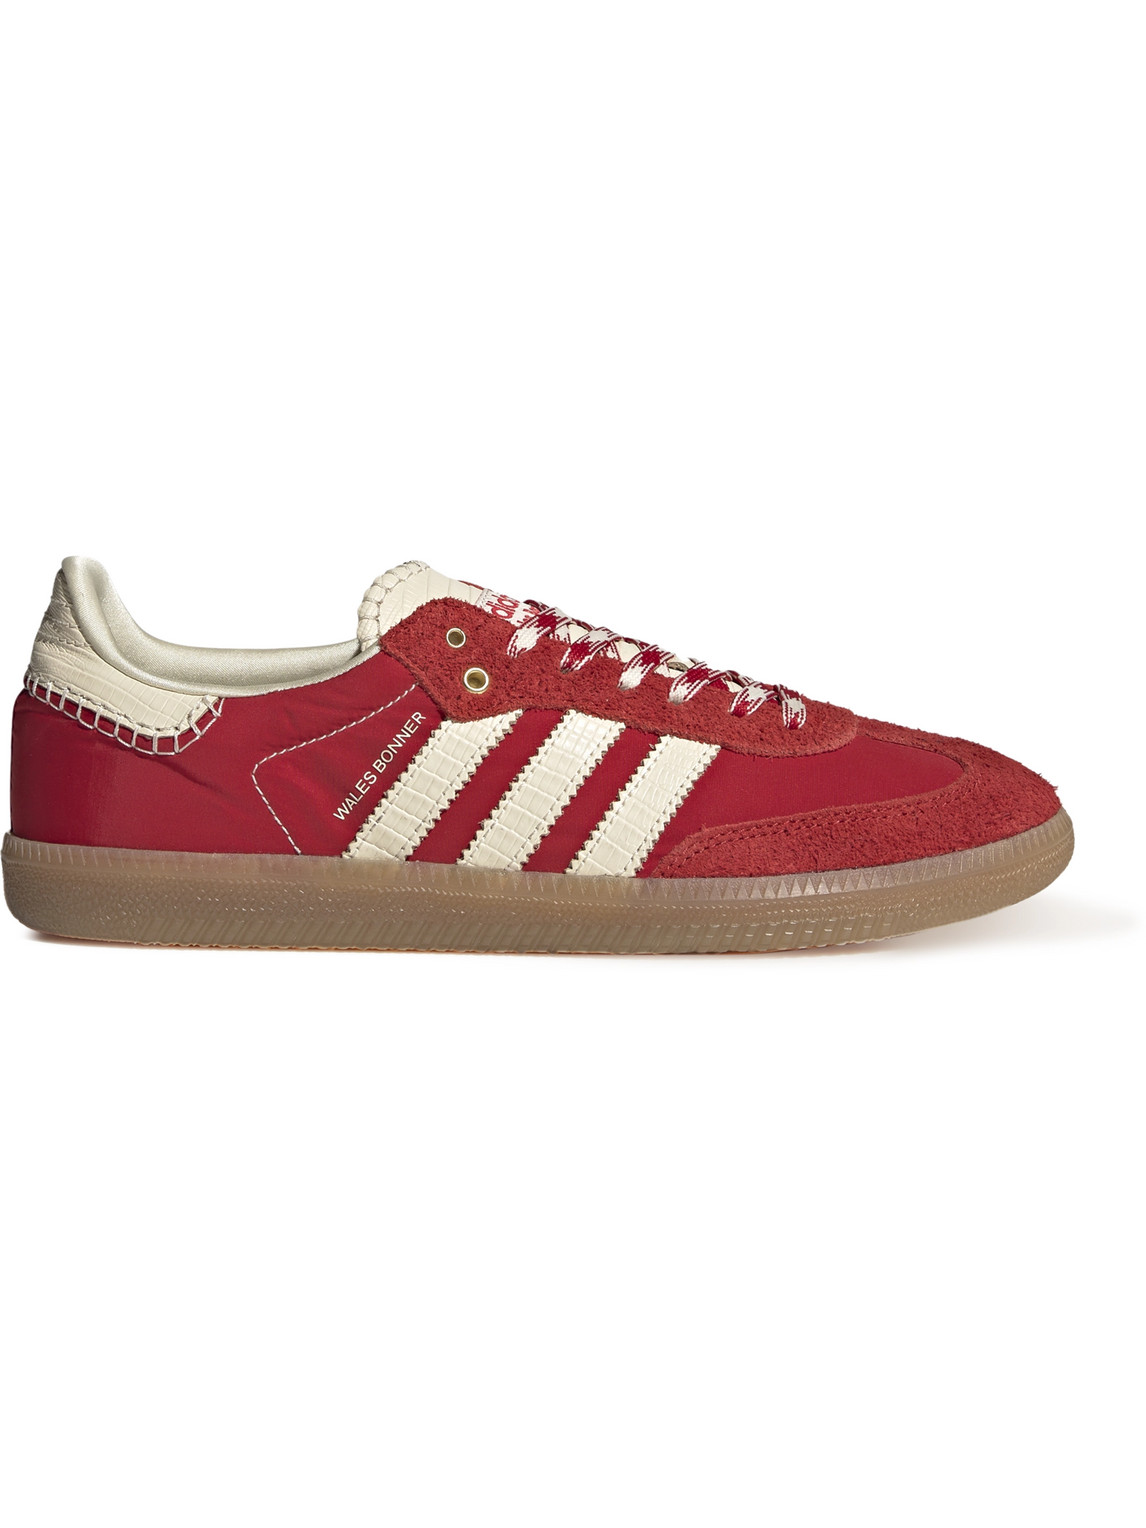 Adidas Consortium Wales Bonner Samba Suede And Croc-effect Leather-trimmed Nylon Sneakers In Red